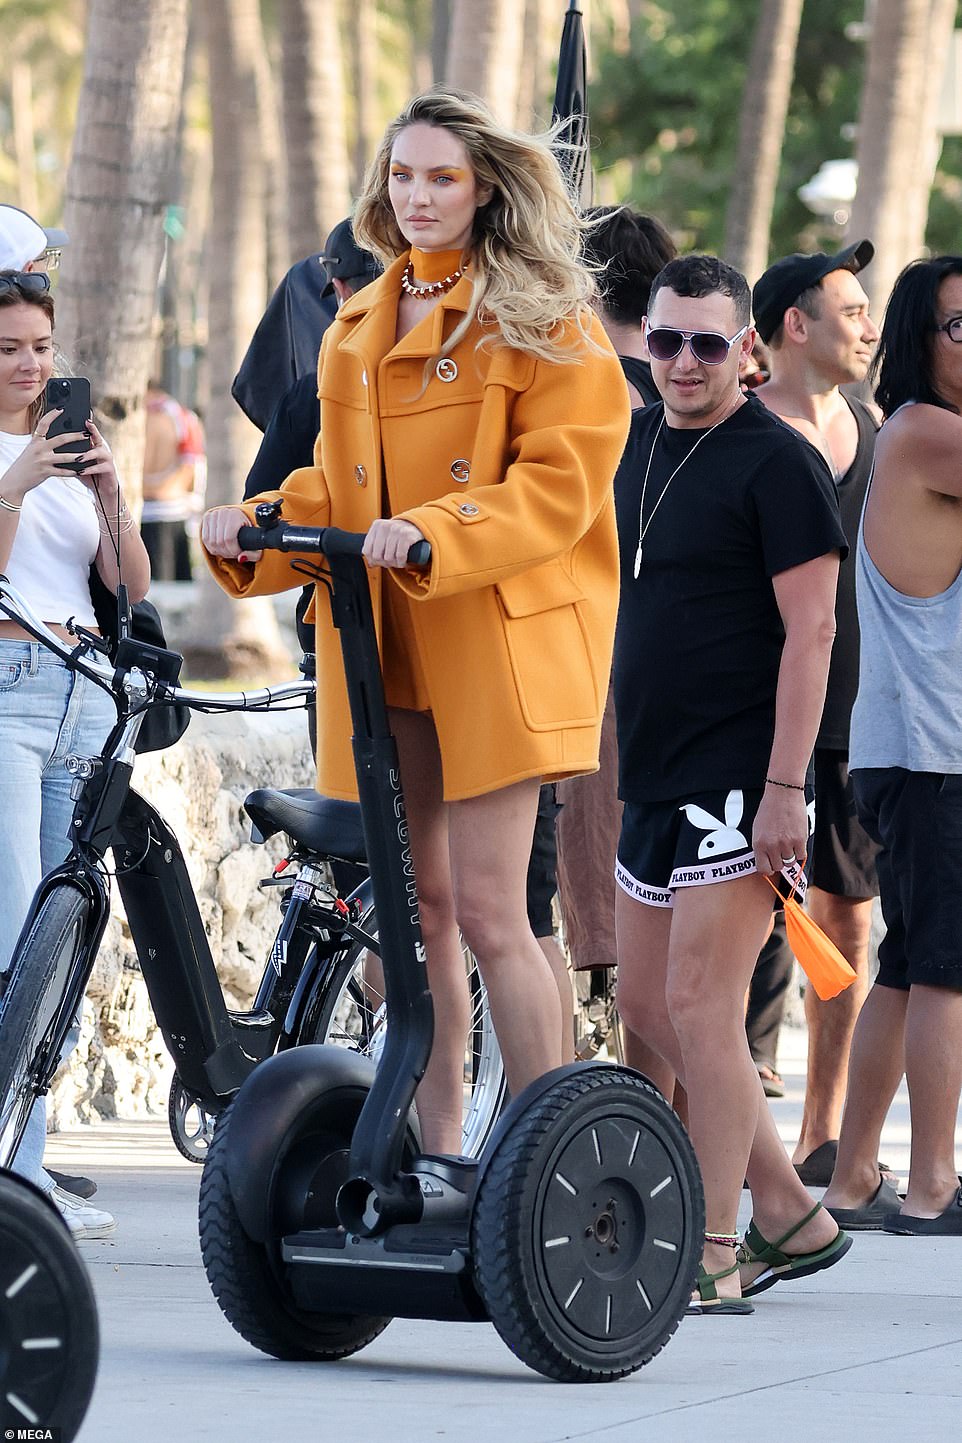 Candice showed off her legs in a thigh-high burnt orange dress, paired with the matching coat, which also had large gold buttons.